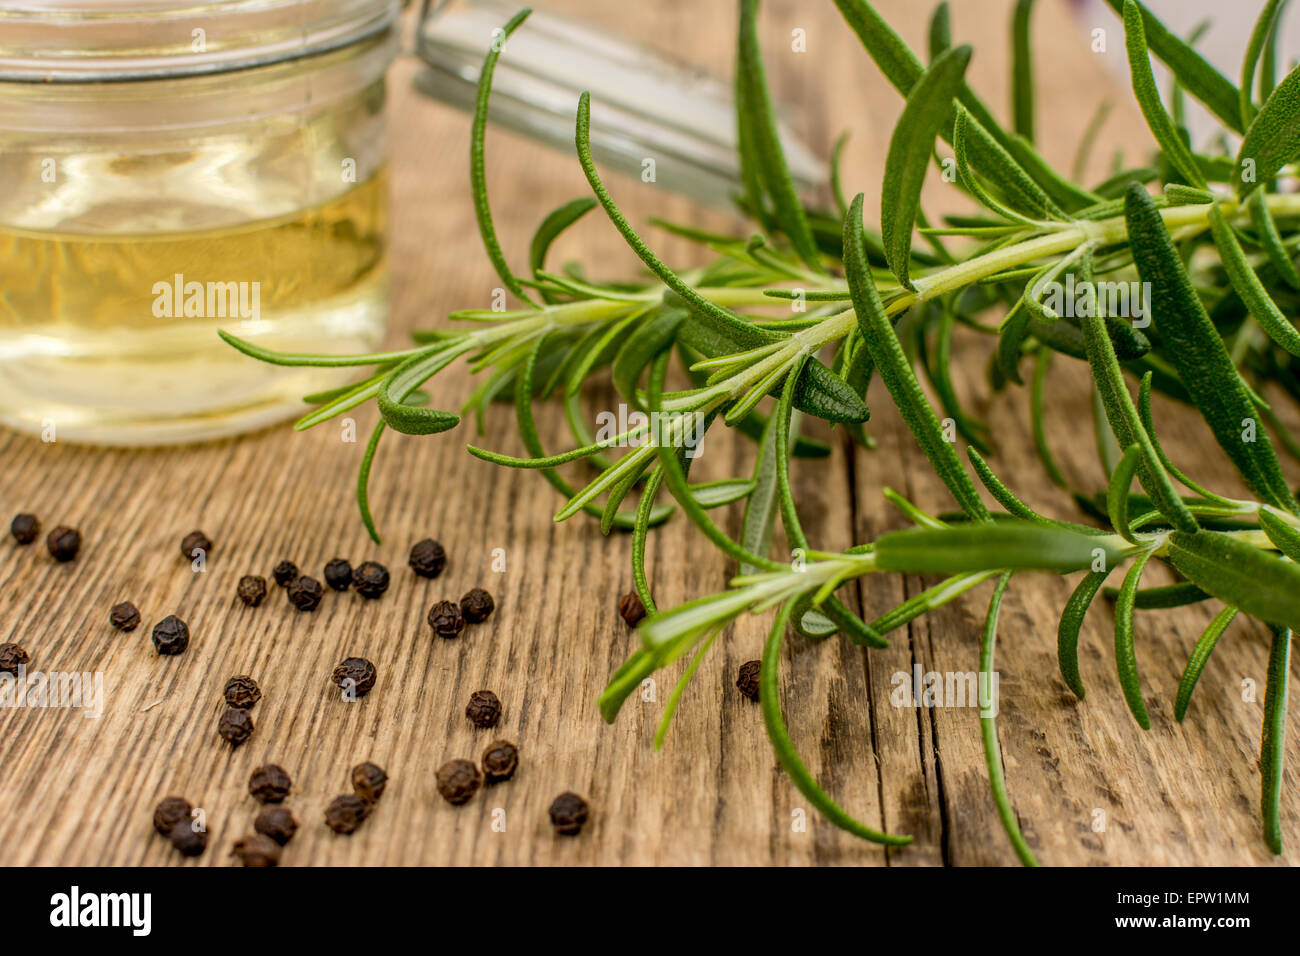 Herb rosemary with oil on wood table Stock Photo